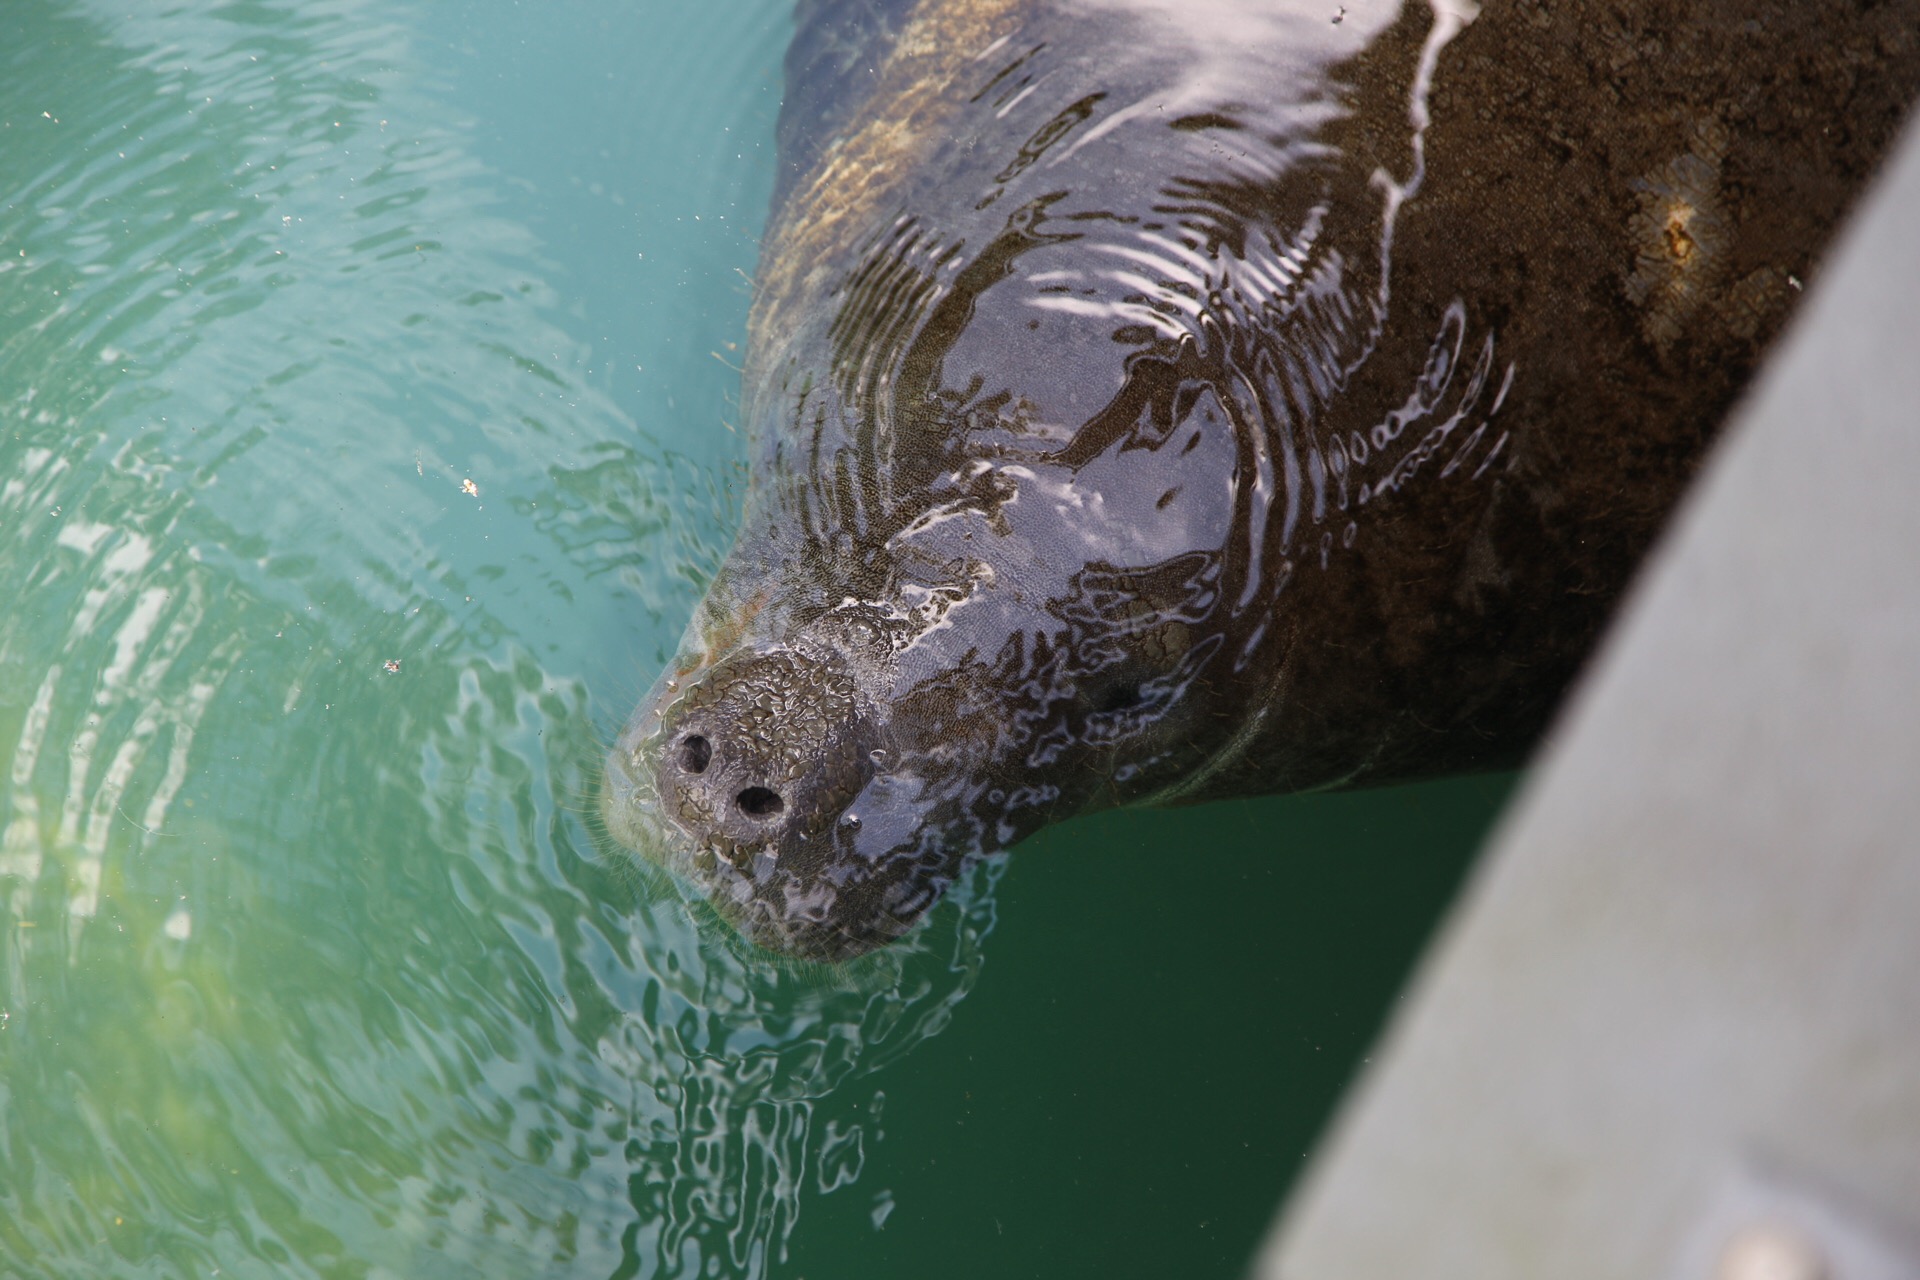 Check out 5 Reasons to Visit Homosassa Springs State Park at MoreDetours.com